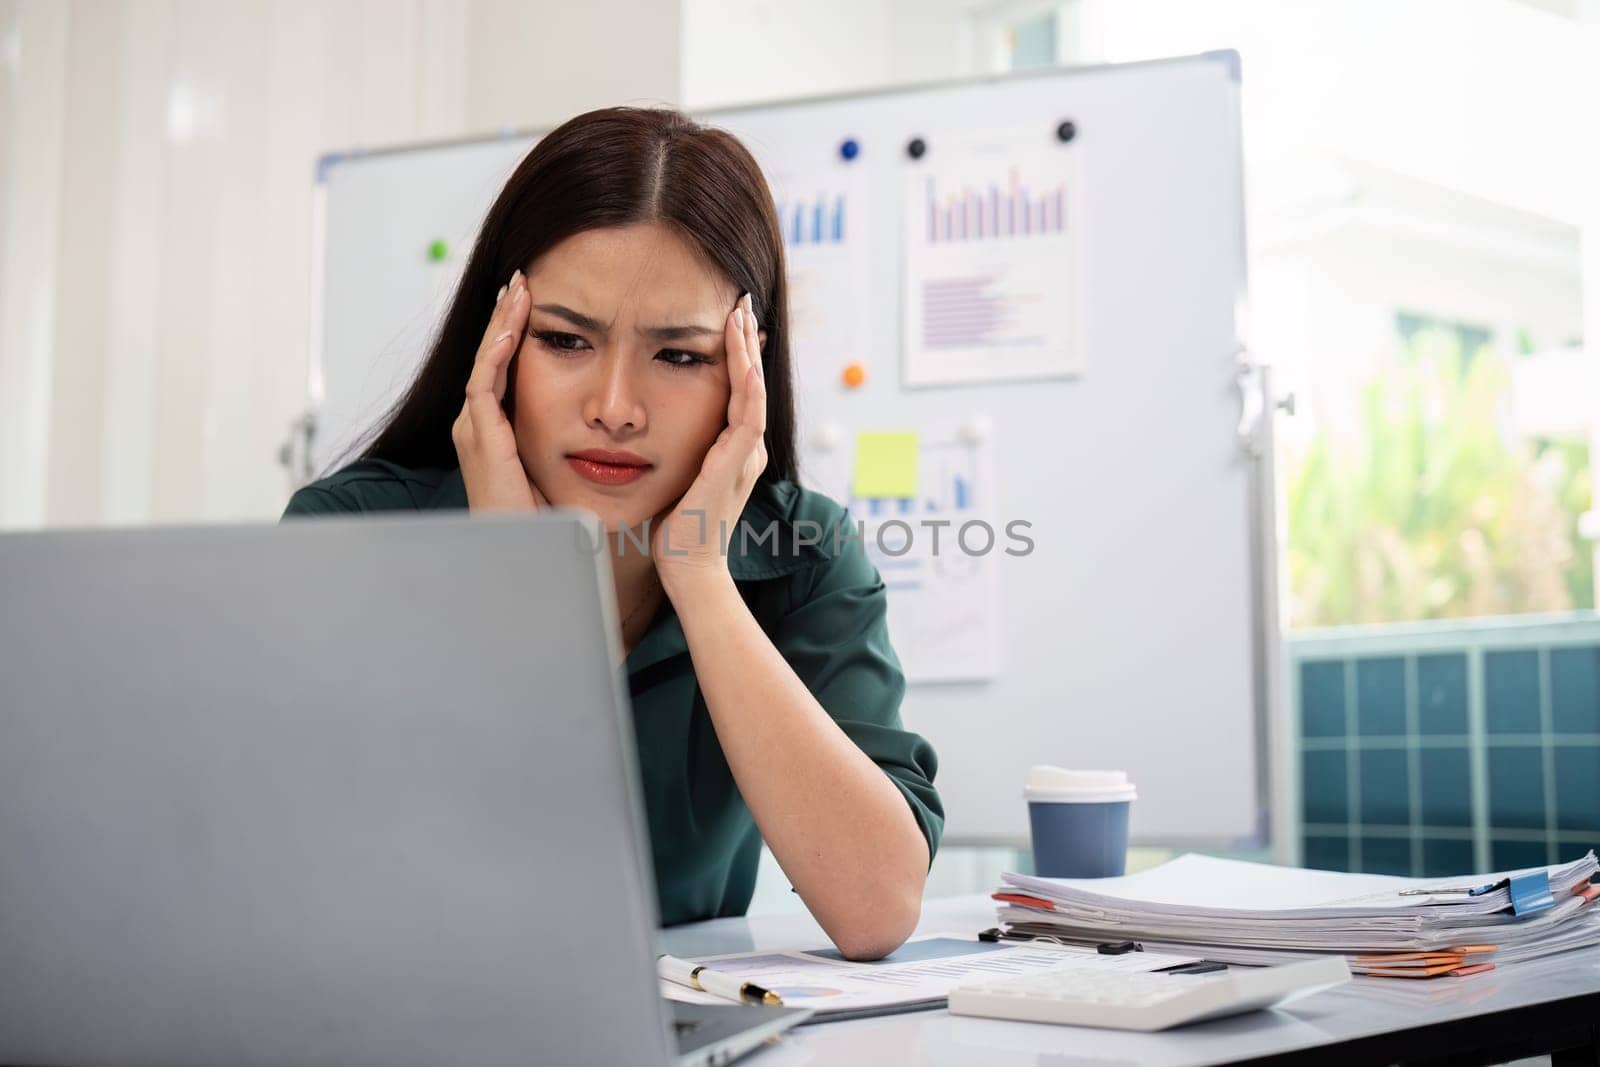 Stressed overwhelmed businesswoman working with computer laptop while having headache in the office.